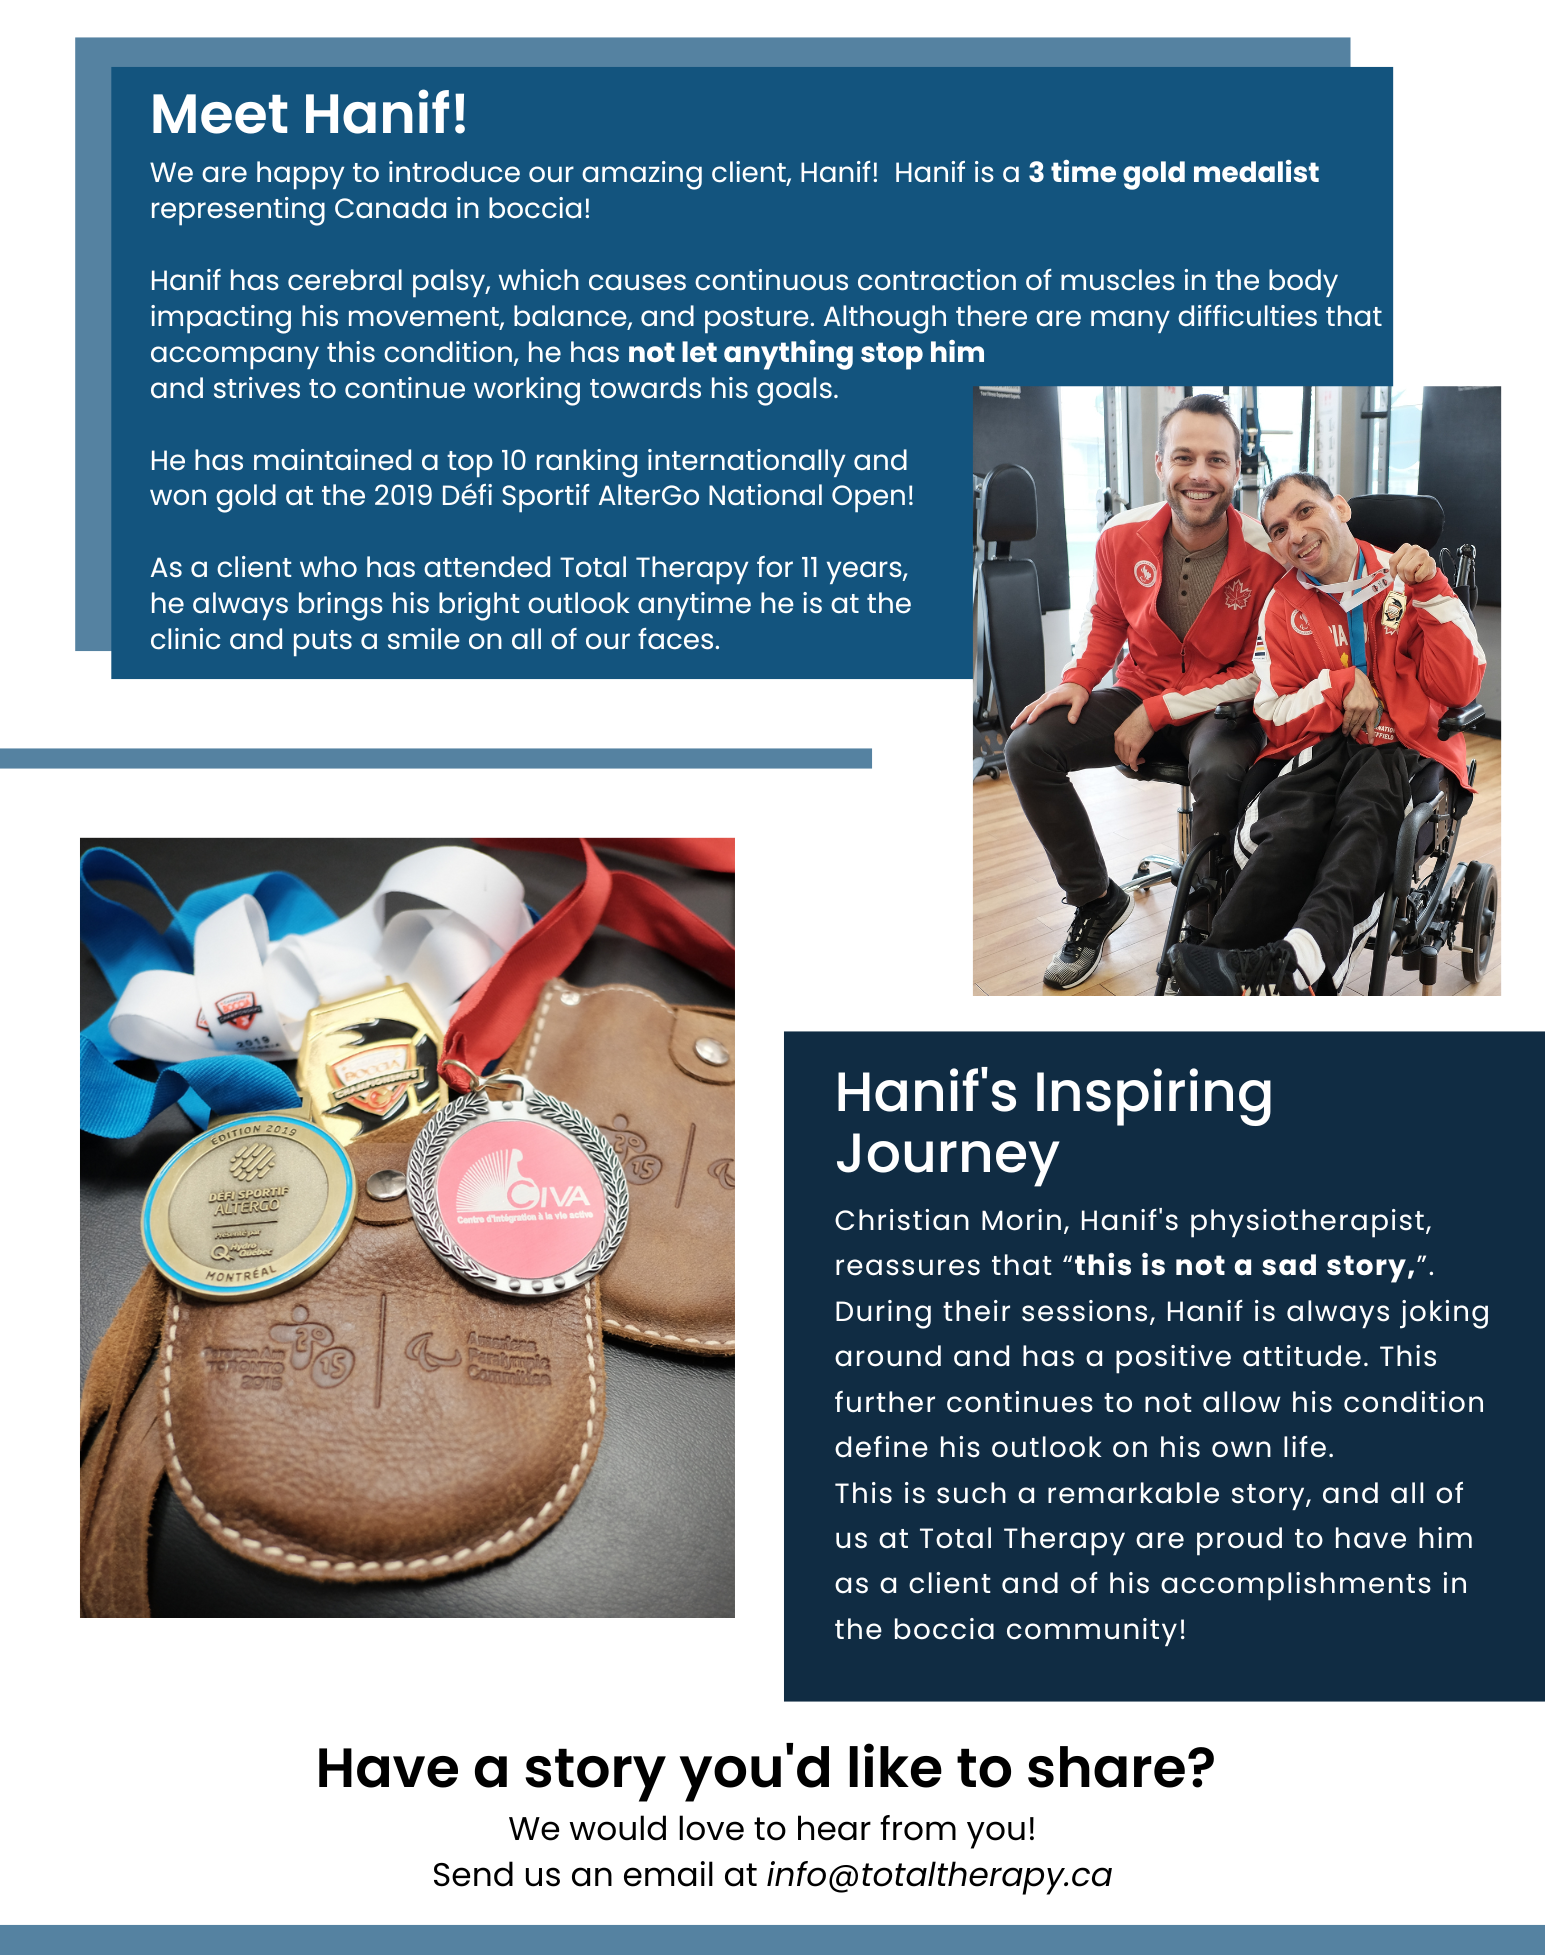 CLIENT SUCCESS STORIES. Meet Hanif! We are happy to introduce our amazing client, Hanif! Hanif is a 3 time gold medalist representing Canada in boccia! Hanif has cerebral palsy, which causes continuous contraction of muscles in the body impacting his movement, balance, and posture. Although there are many difficulties that accompany this condition, he has not let anything stop him and strives to continue working towards his goals. He has maintained a top 10 ranking internationally and won gold at the 2019 Défi Sportif AlterGo National Open! As a client who has attended Total Therapy for 11 years, he always brings his bright outlook anytime he is at the clinic and puts a smile on all of our faces. Hanif's Inspiring Journey! Christian Morin, Hanif's physiotherapist, reassures that “this is not a sad story,”. During their sessions, Hanif is always joking around and has a positive attitude. This further continues to not allow his condition define his outlook on his own life. This is such a remarkable story, and all of us at Total Therapy are proud to have him as a client and of his accomplishments in the boccia community! Have a story you'd like to share? We would love to hear from you! Send us an email at info@totaltherapy.ca